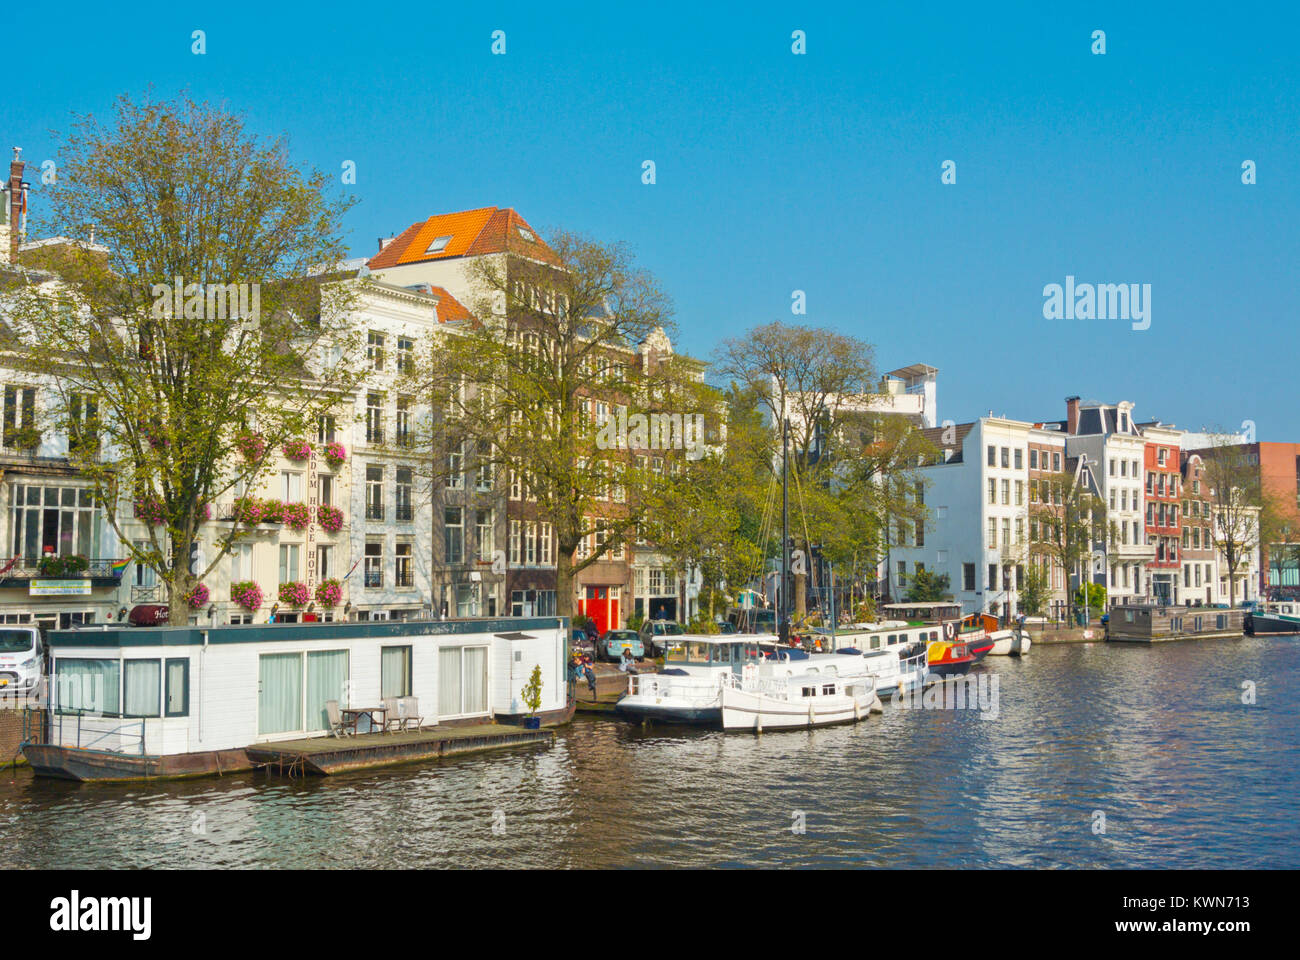 Boats and houseboats, Amstel river, Amsterdam, The Netherlands Stock Photo